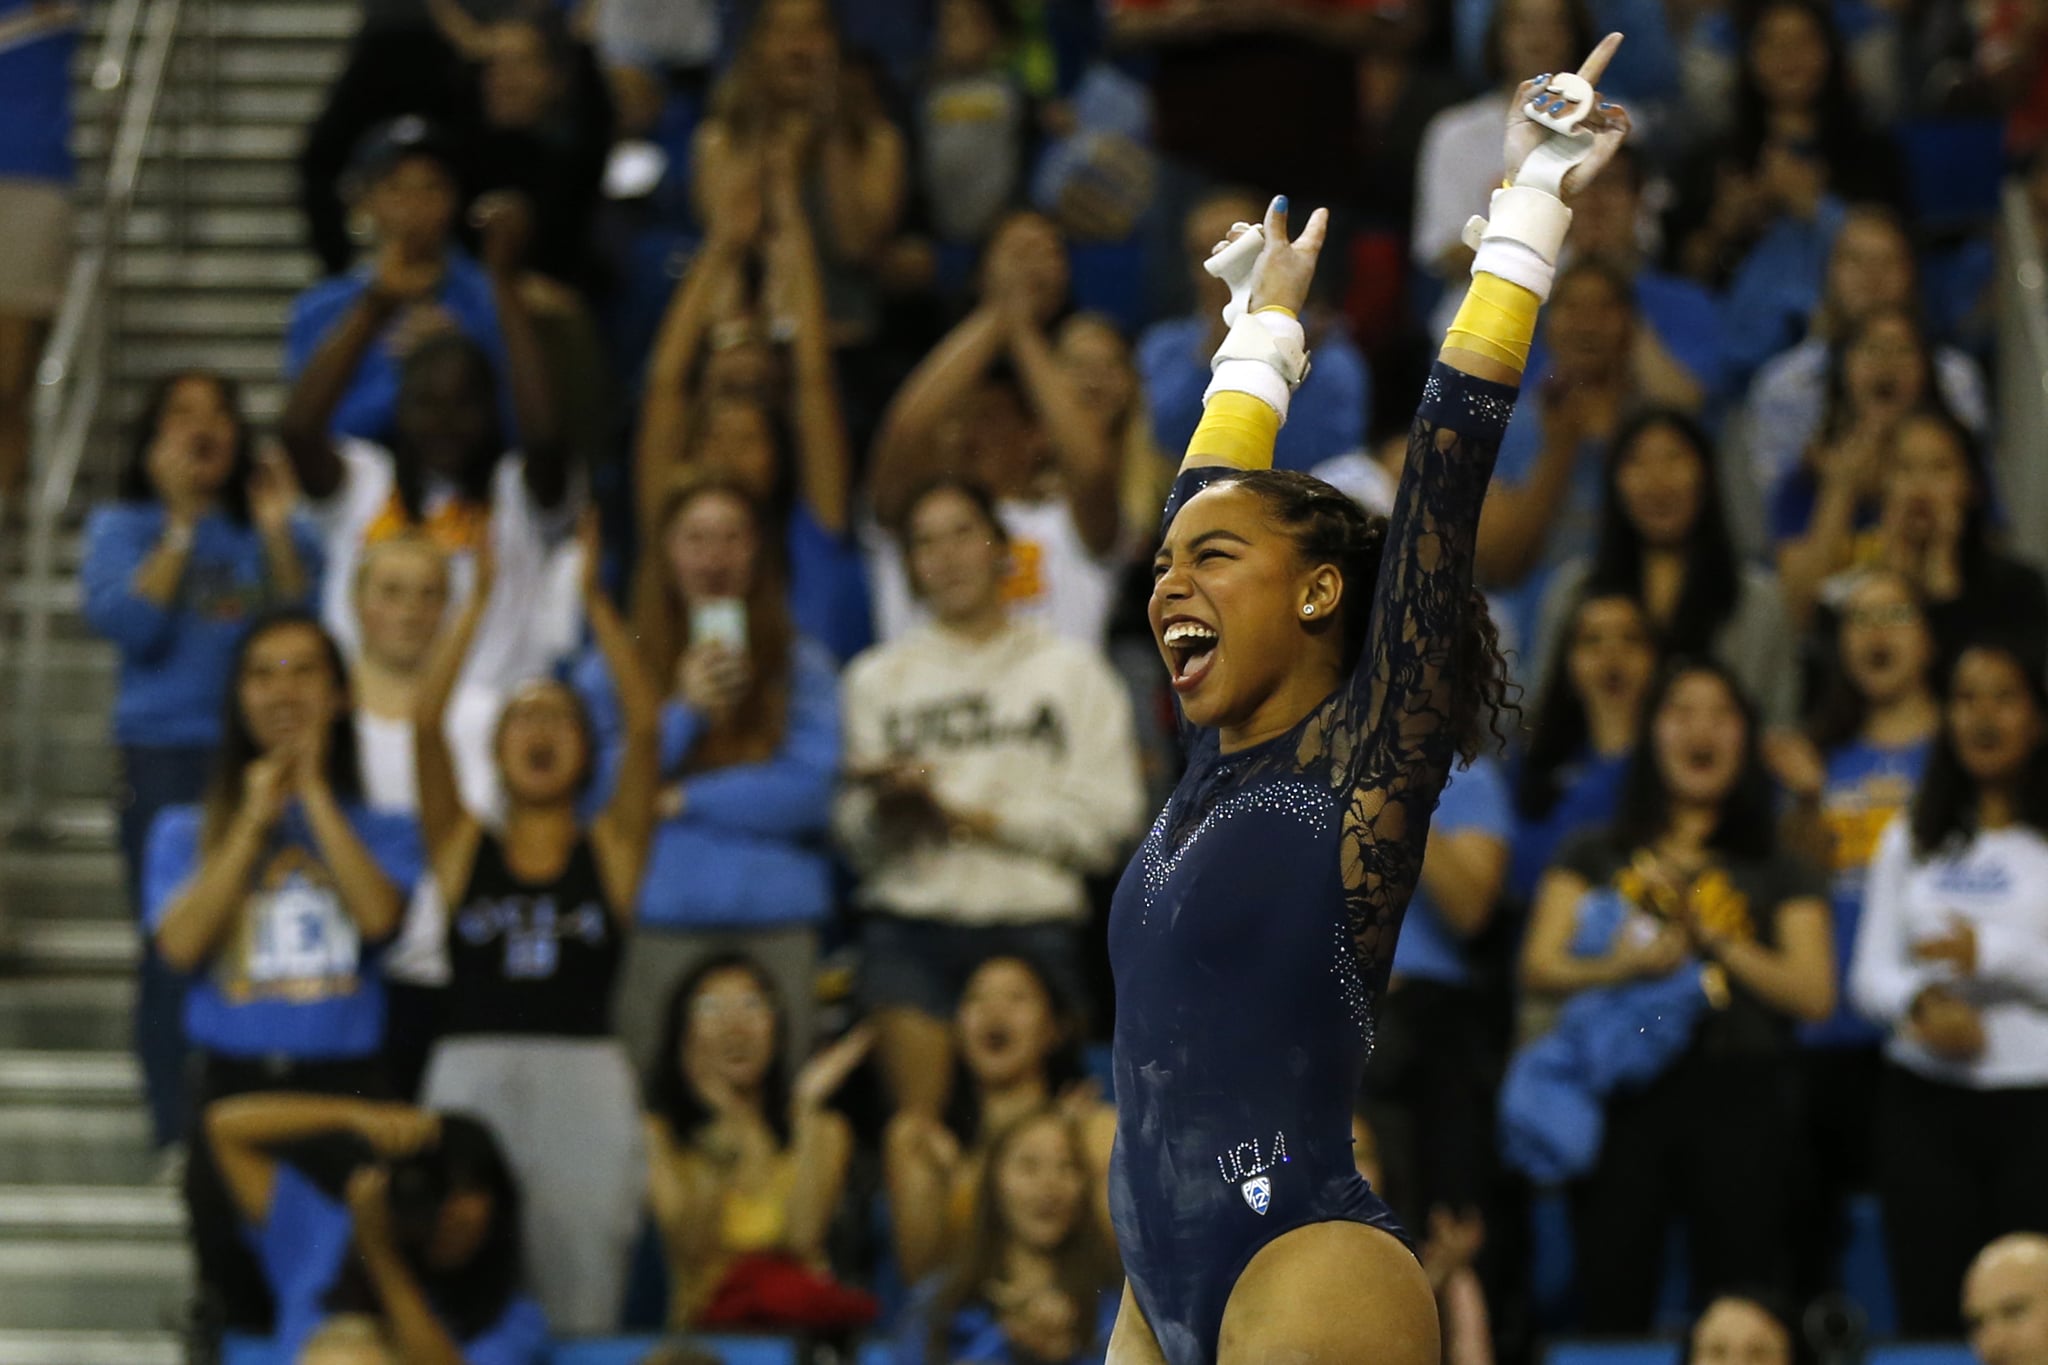 LOS ANGELES, CALIFORNIA - JANUARY 21: UCLA's Margzetta Frazier celebrates after completing uneven bars during at PAC-12 meet against Arizona State at Pauley Pavilion on January 21, 2019 in Los Angeles, California. (Photo by Katharine Lotze/Getty Images)